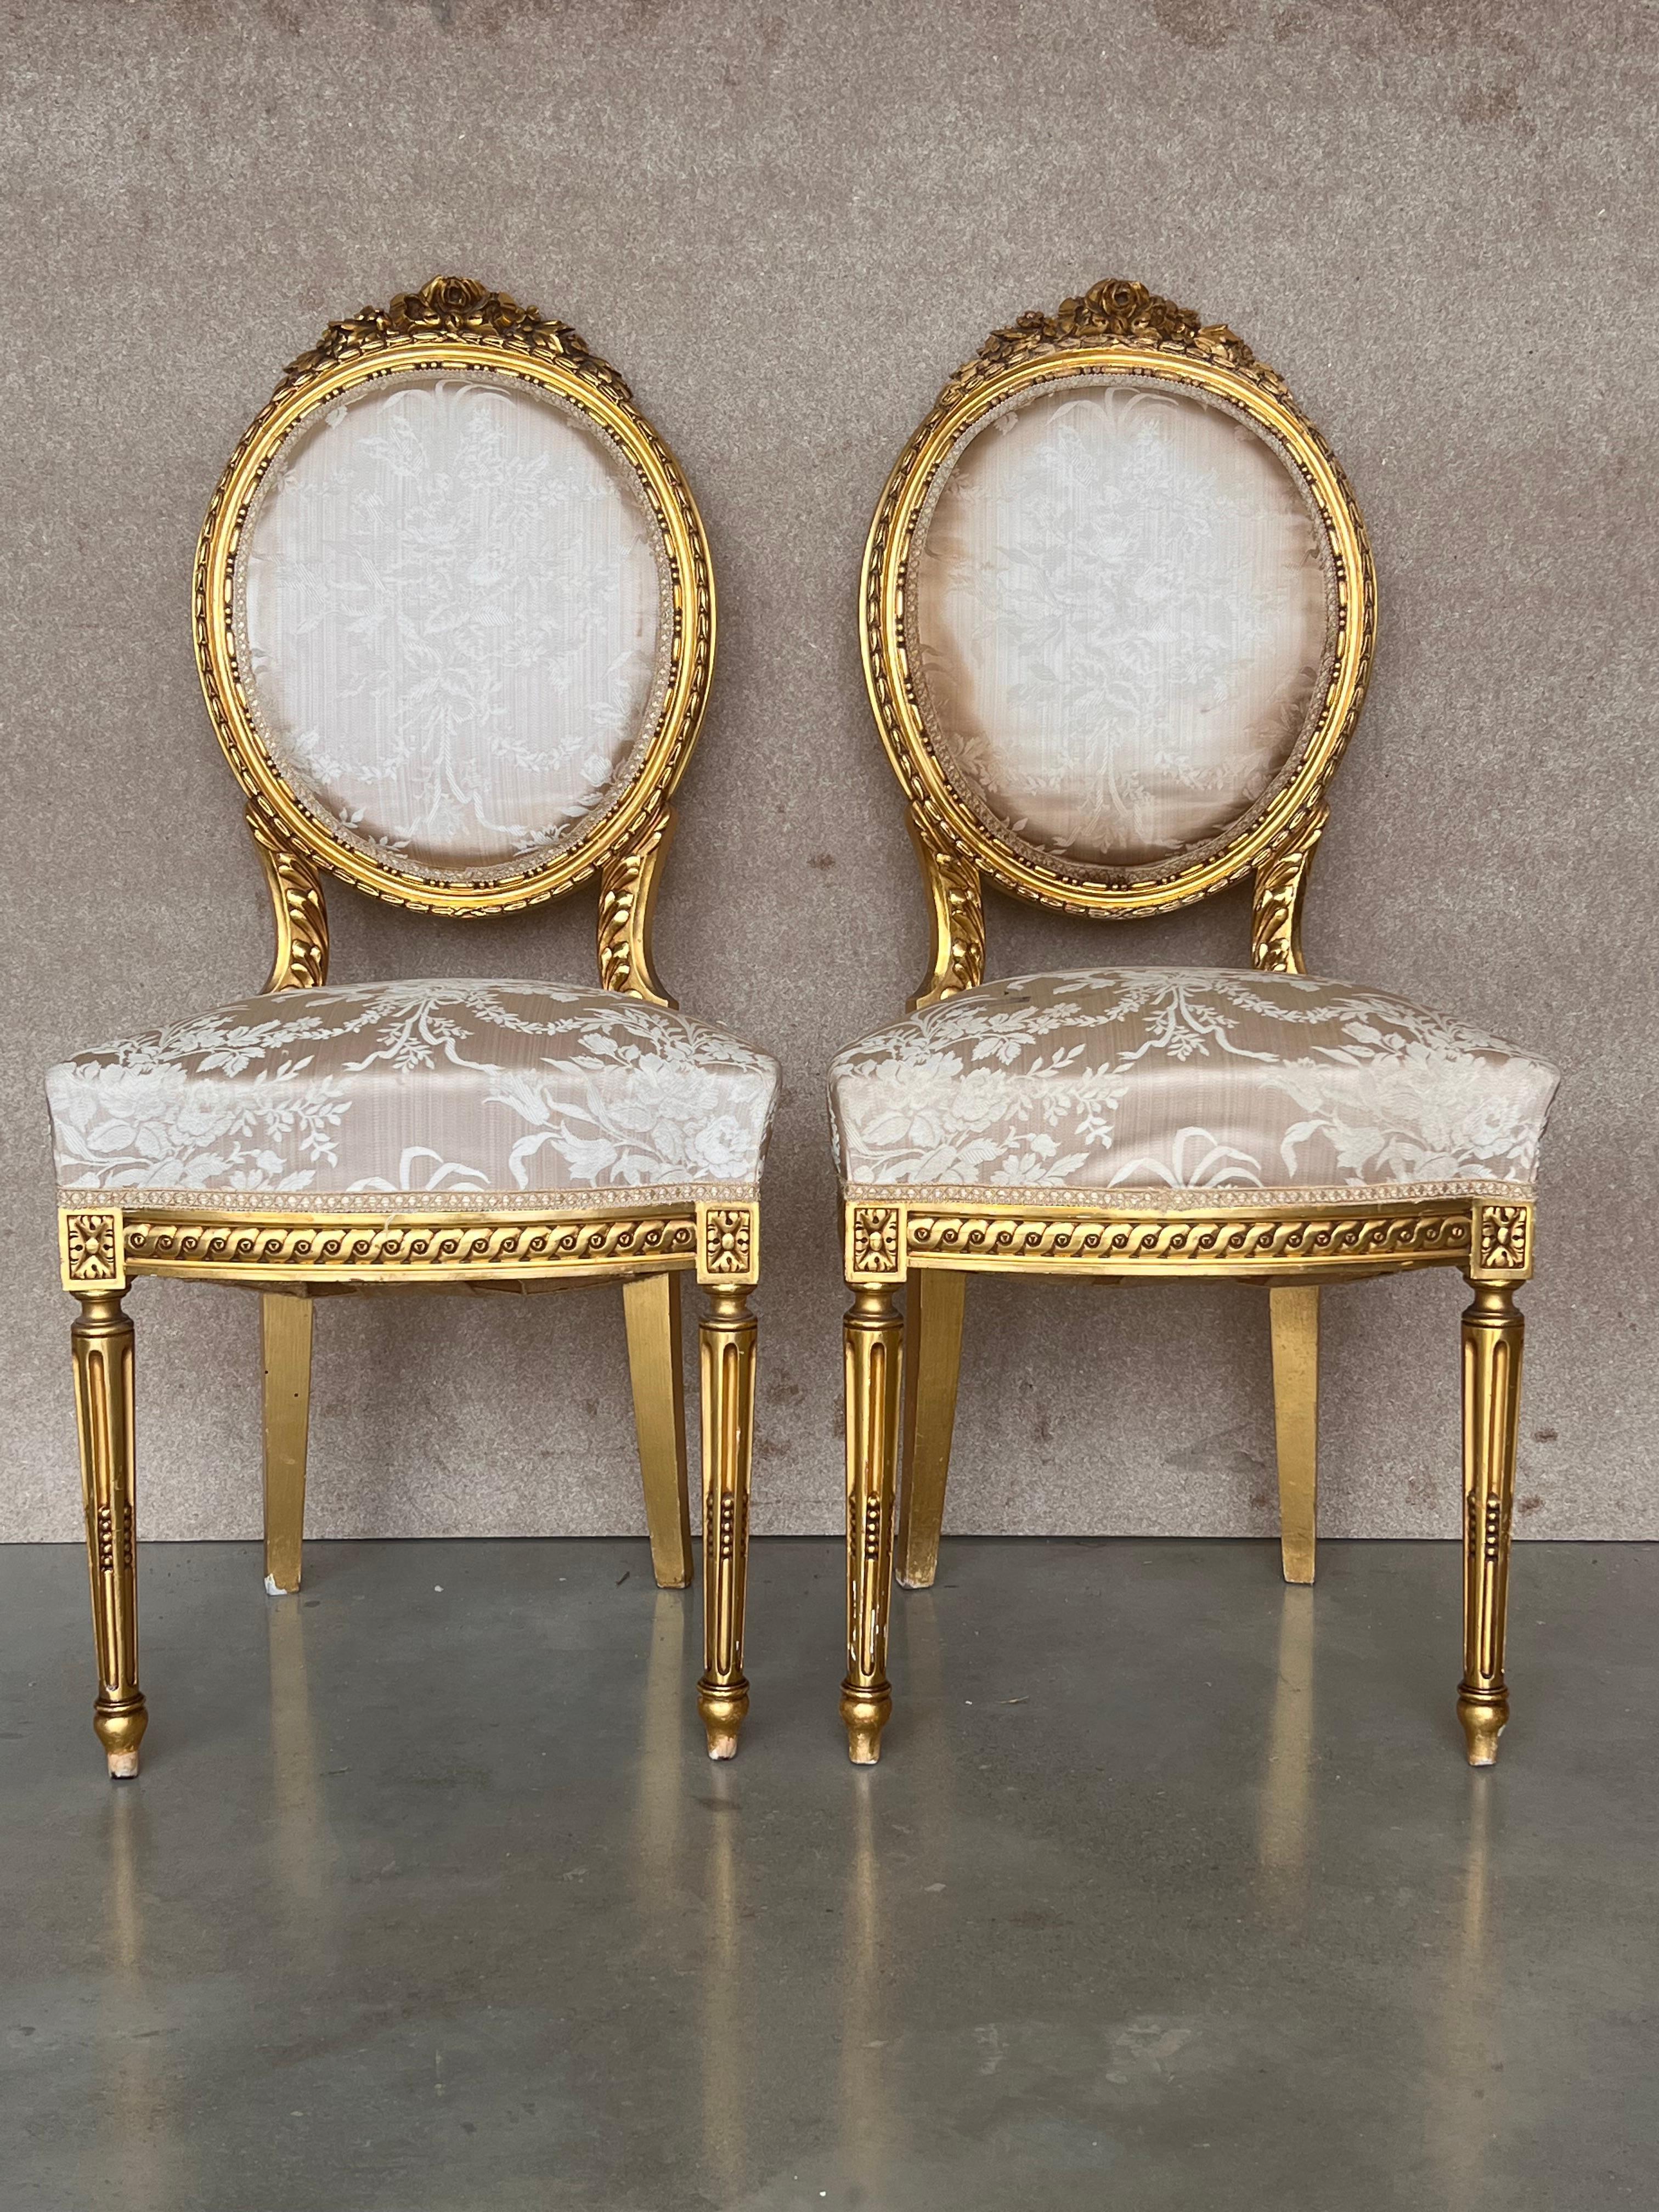 French Louis XVI style dining side chair from Paris decorated with timeless classical styling and hand carved excellence on the entire framework, emphasizing typical neoclassical gilt carvings of acanthus leaves and laurel wreaths, circa 1920s.